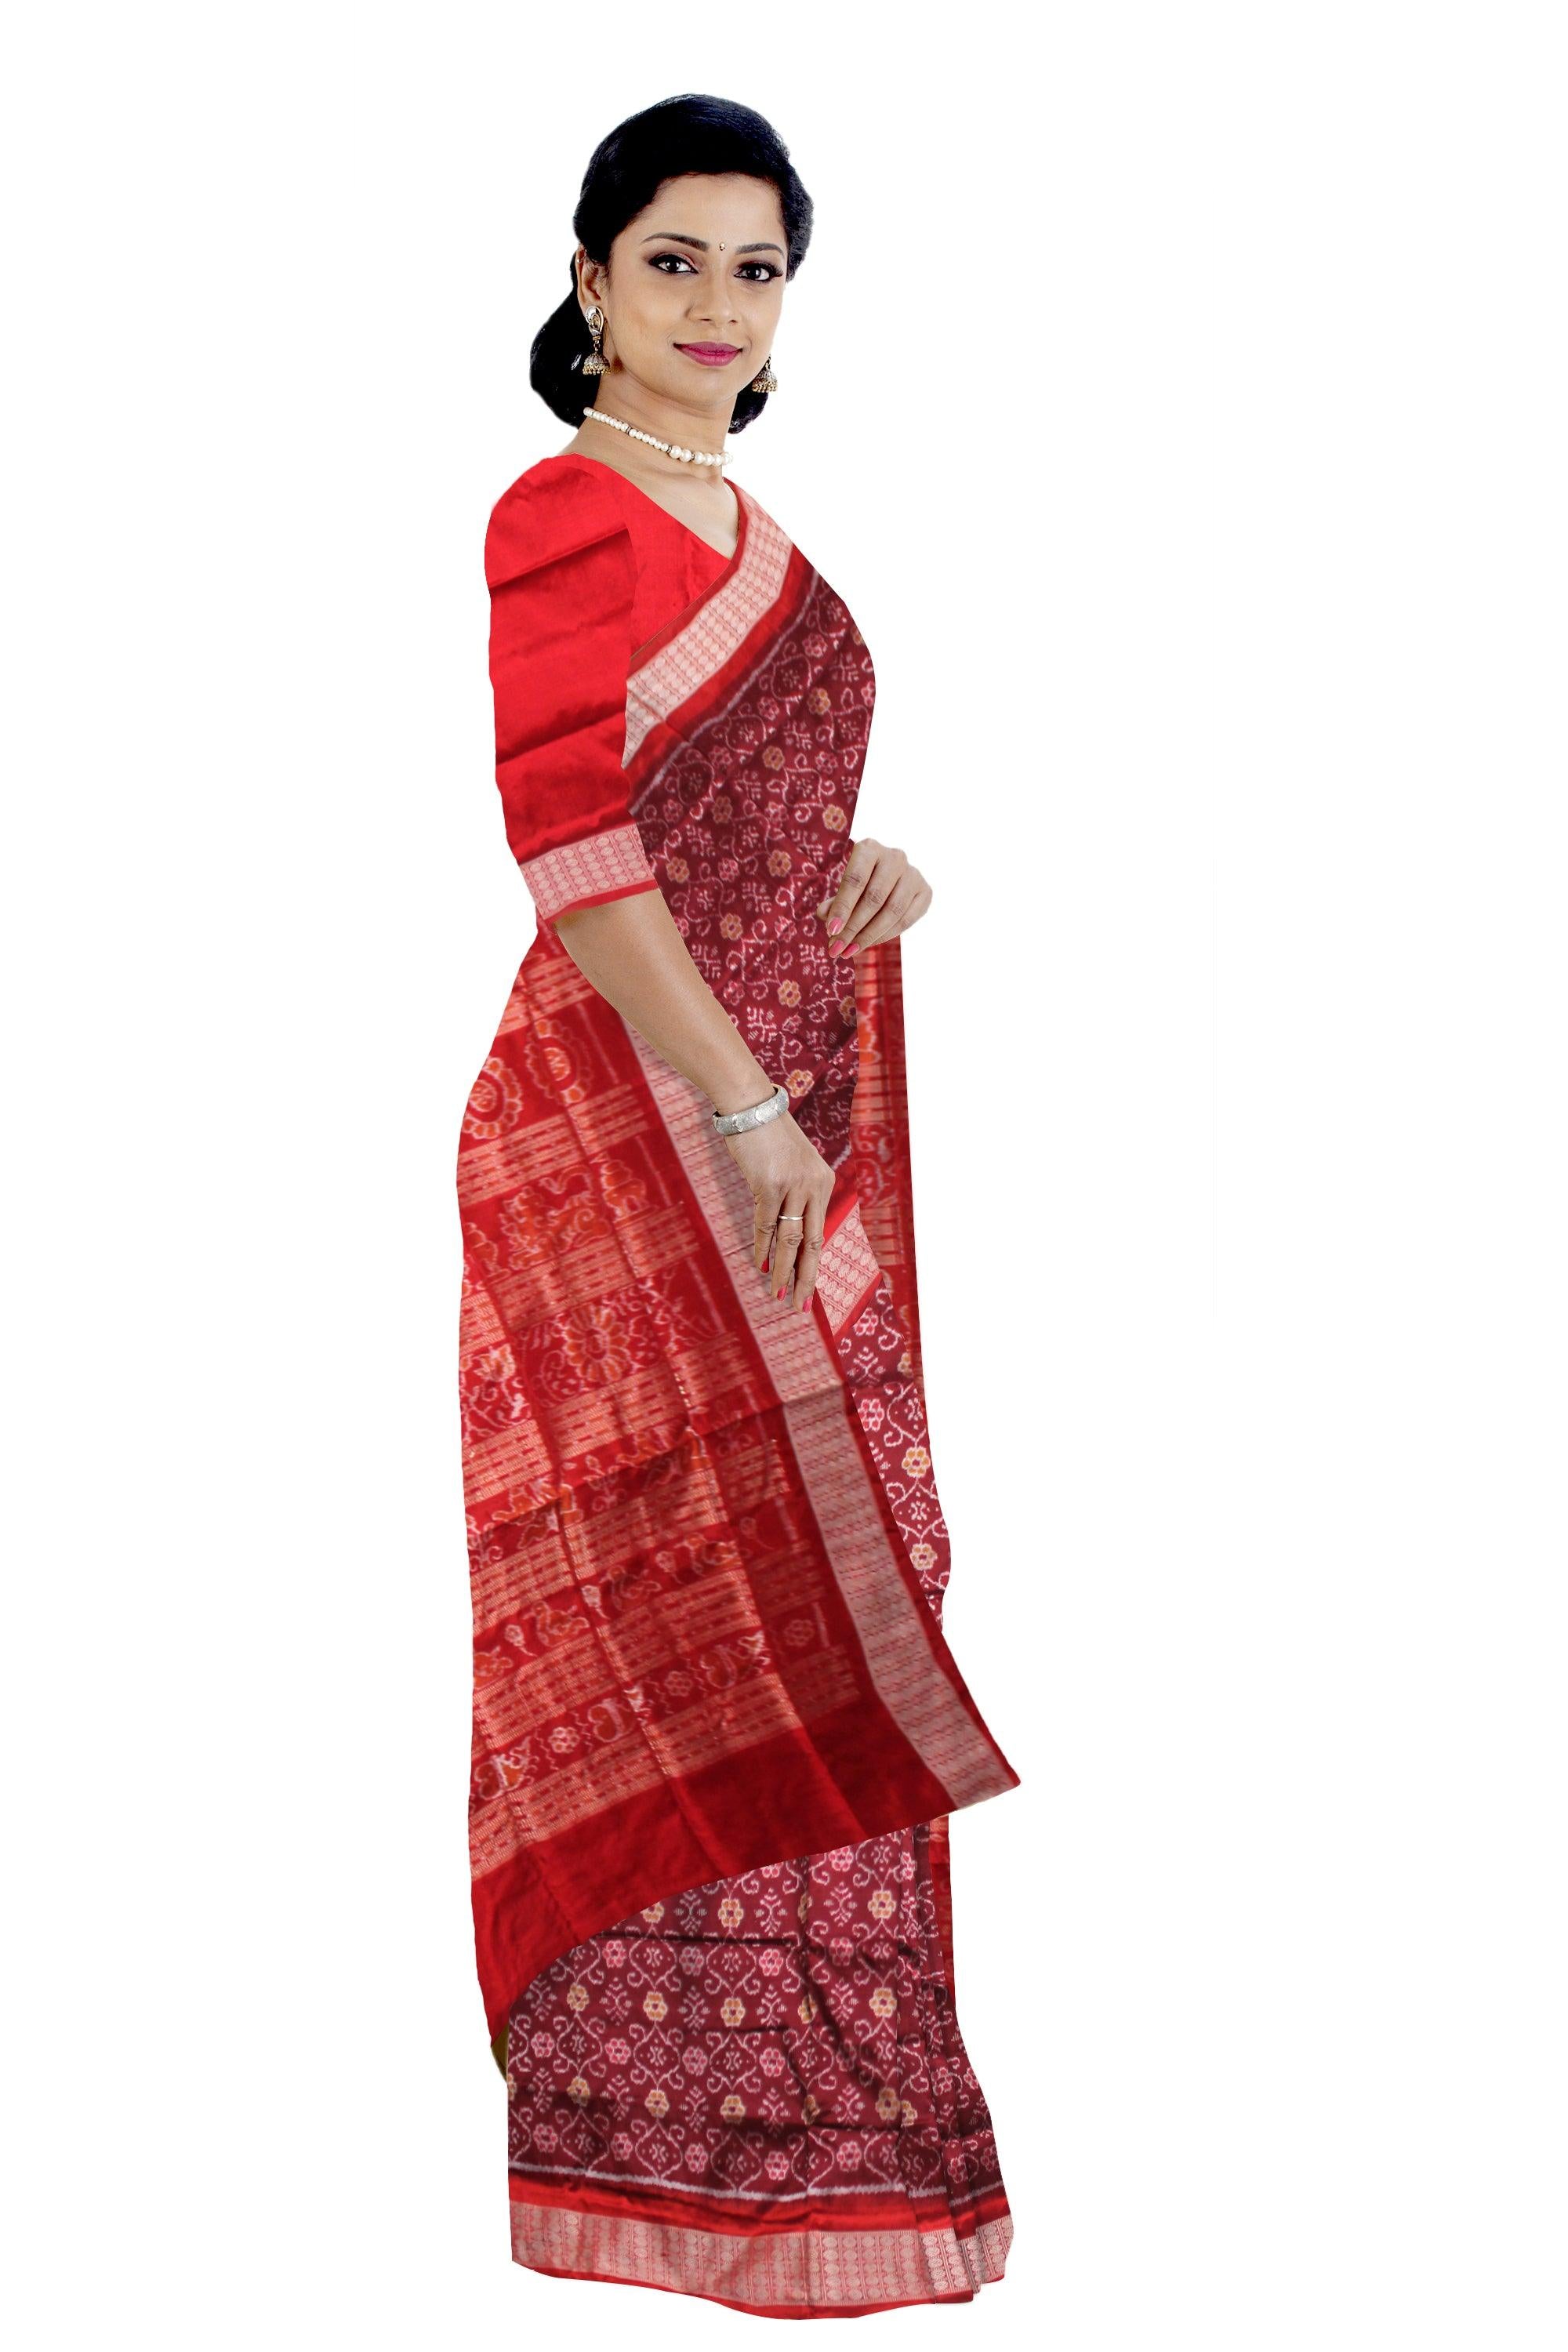 SONEPUR BANDHA PURE SILK SAREE IN CARMINE AND RED COLOR, WITH BLOUSE PIECE. - Koshali Arts & Crafts Enterprise